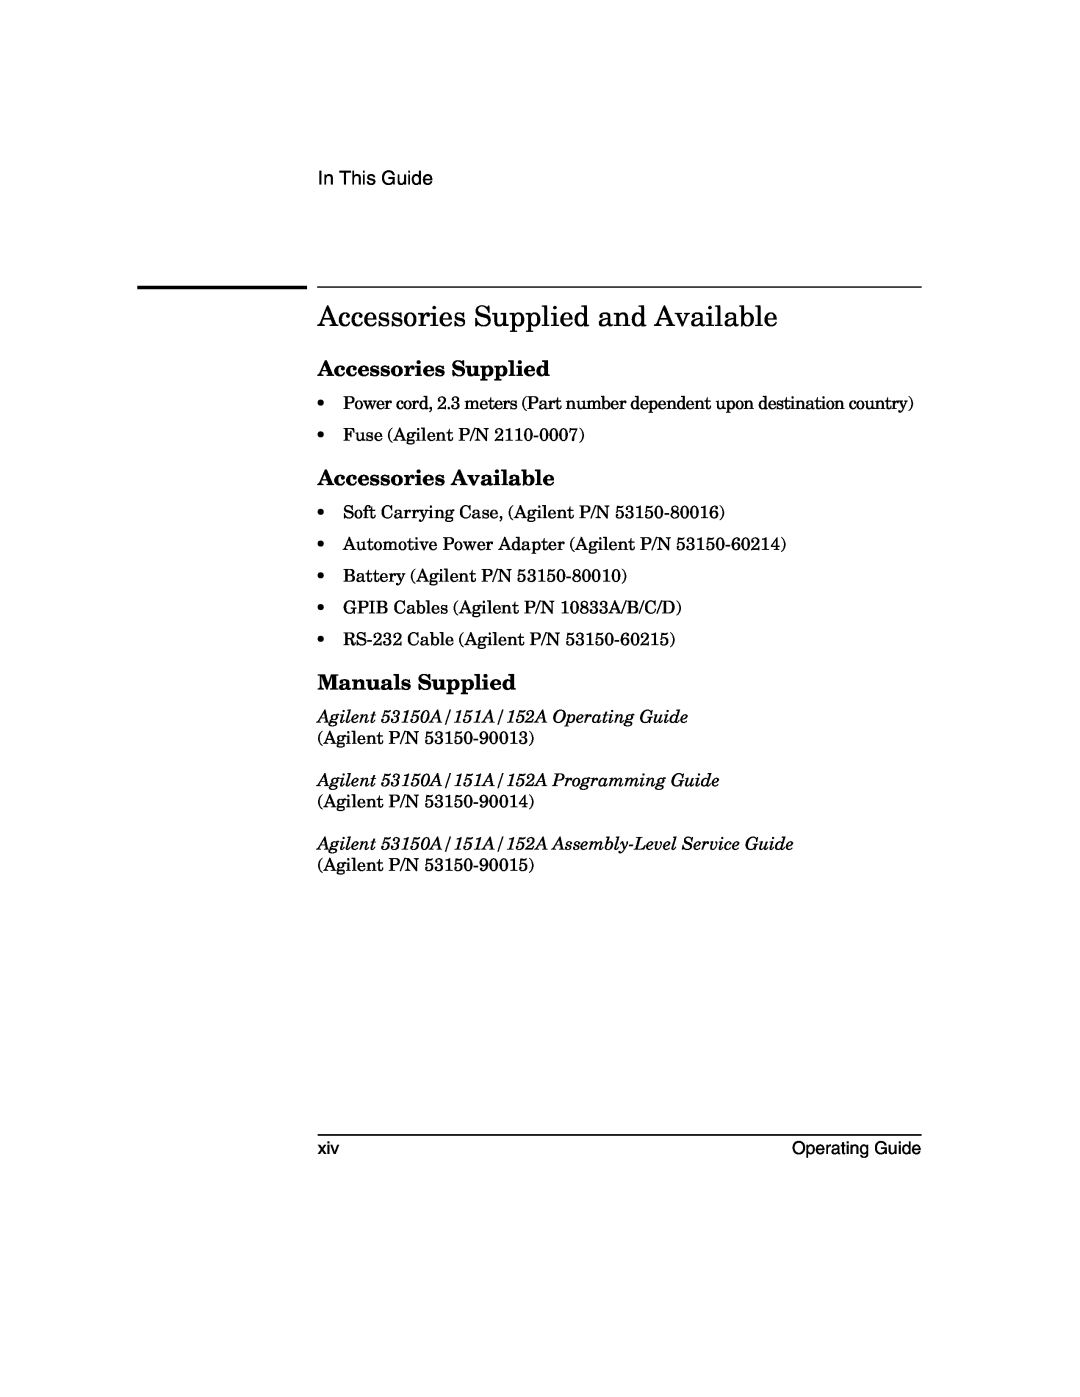 Agilent Technologies 53151A Accessories Supplied and Available, Accessories Available, Manuals Supplied, In This Guide 